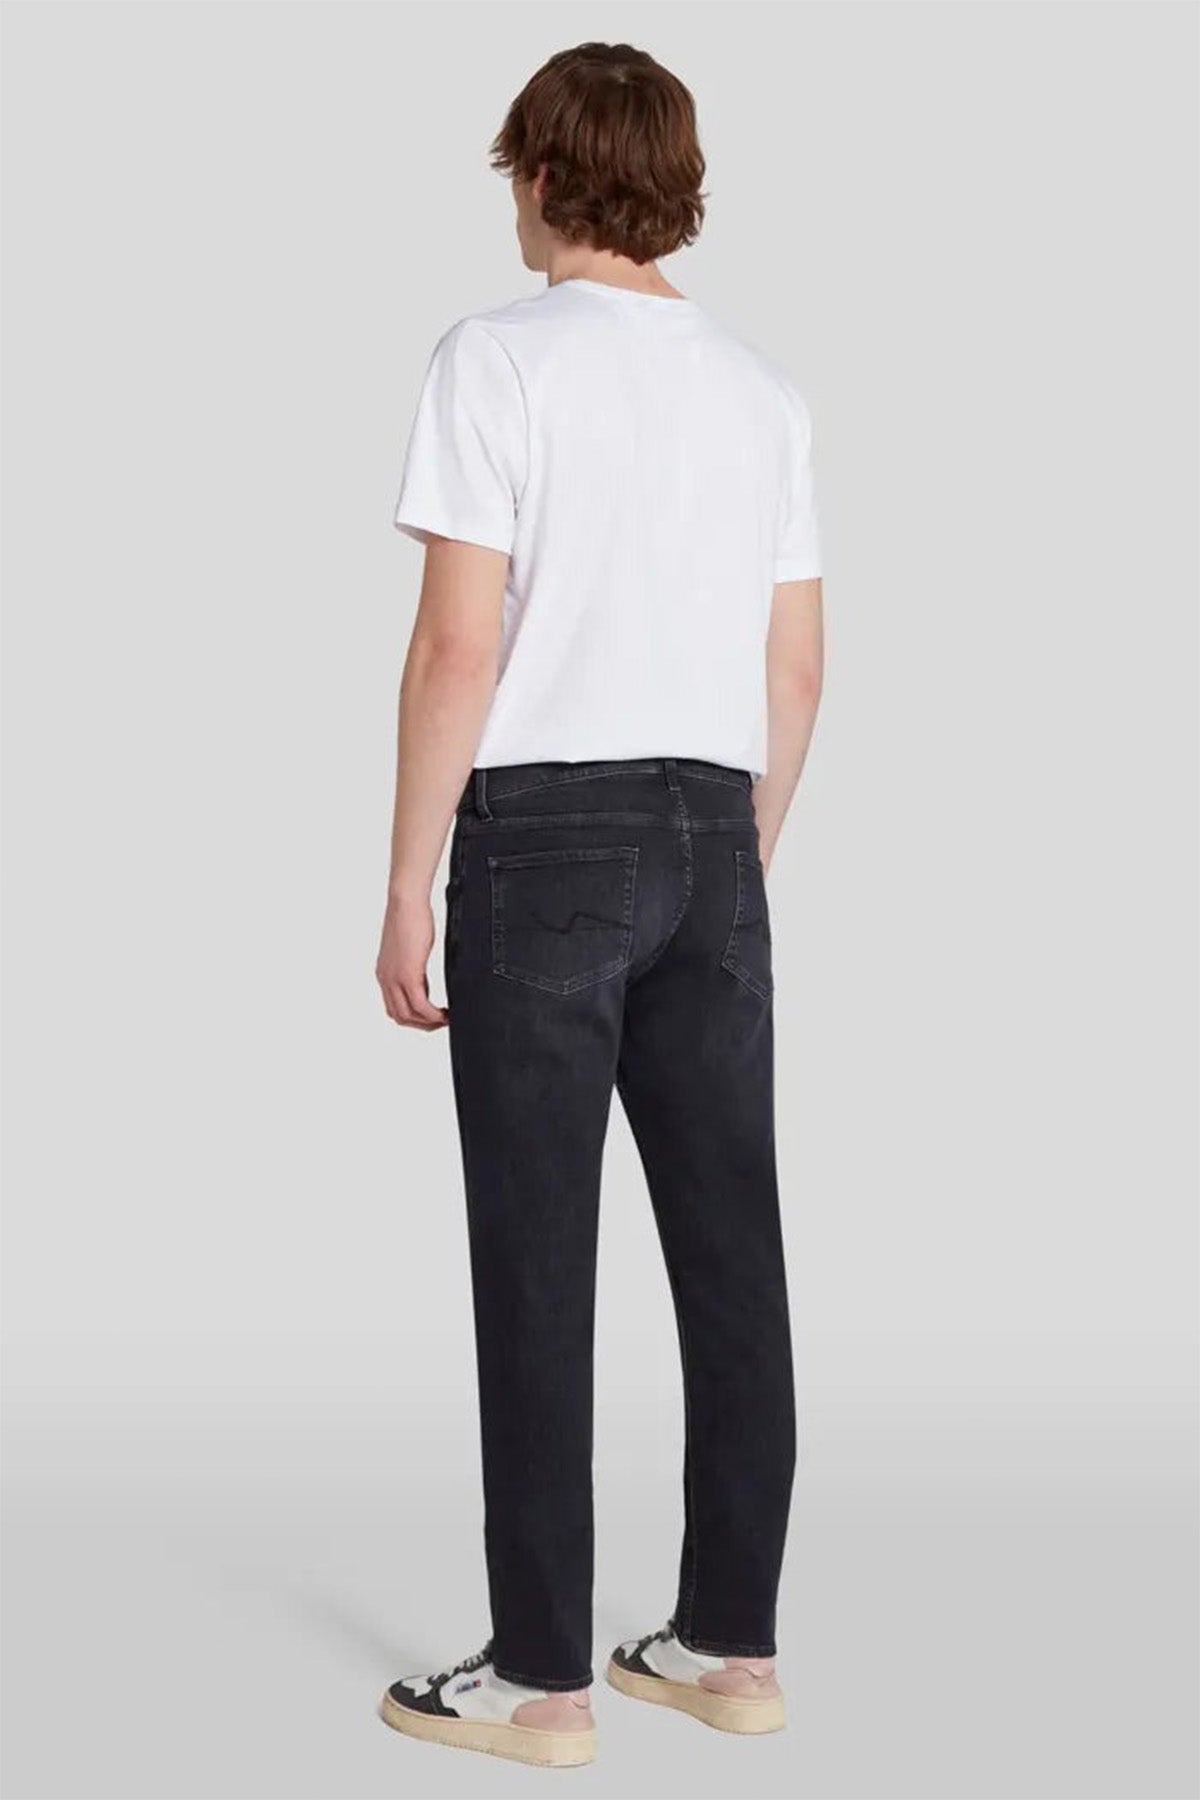 7 For All Mankind Slimmy Tapered Moden Slim Fit Jeans-Libas Trendy Fashion Store